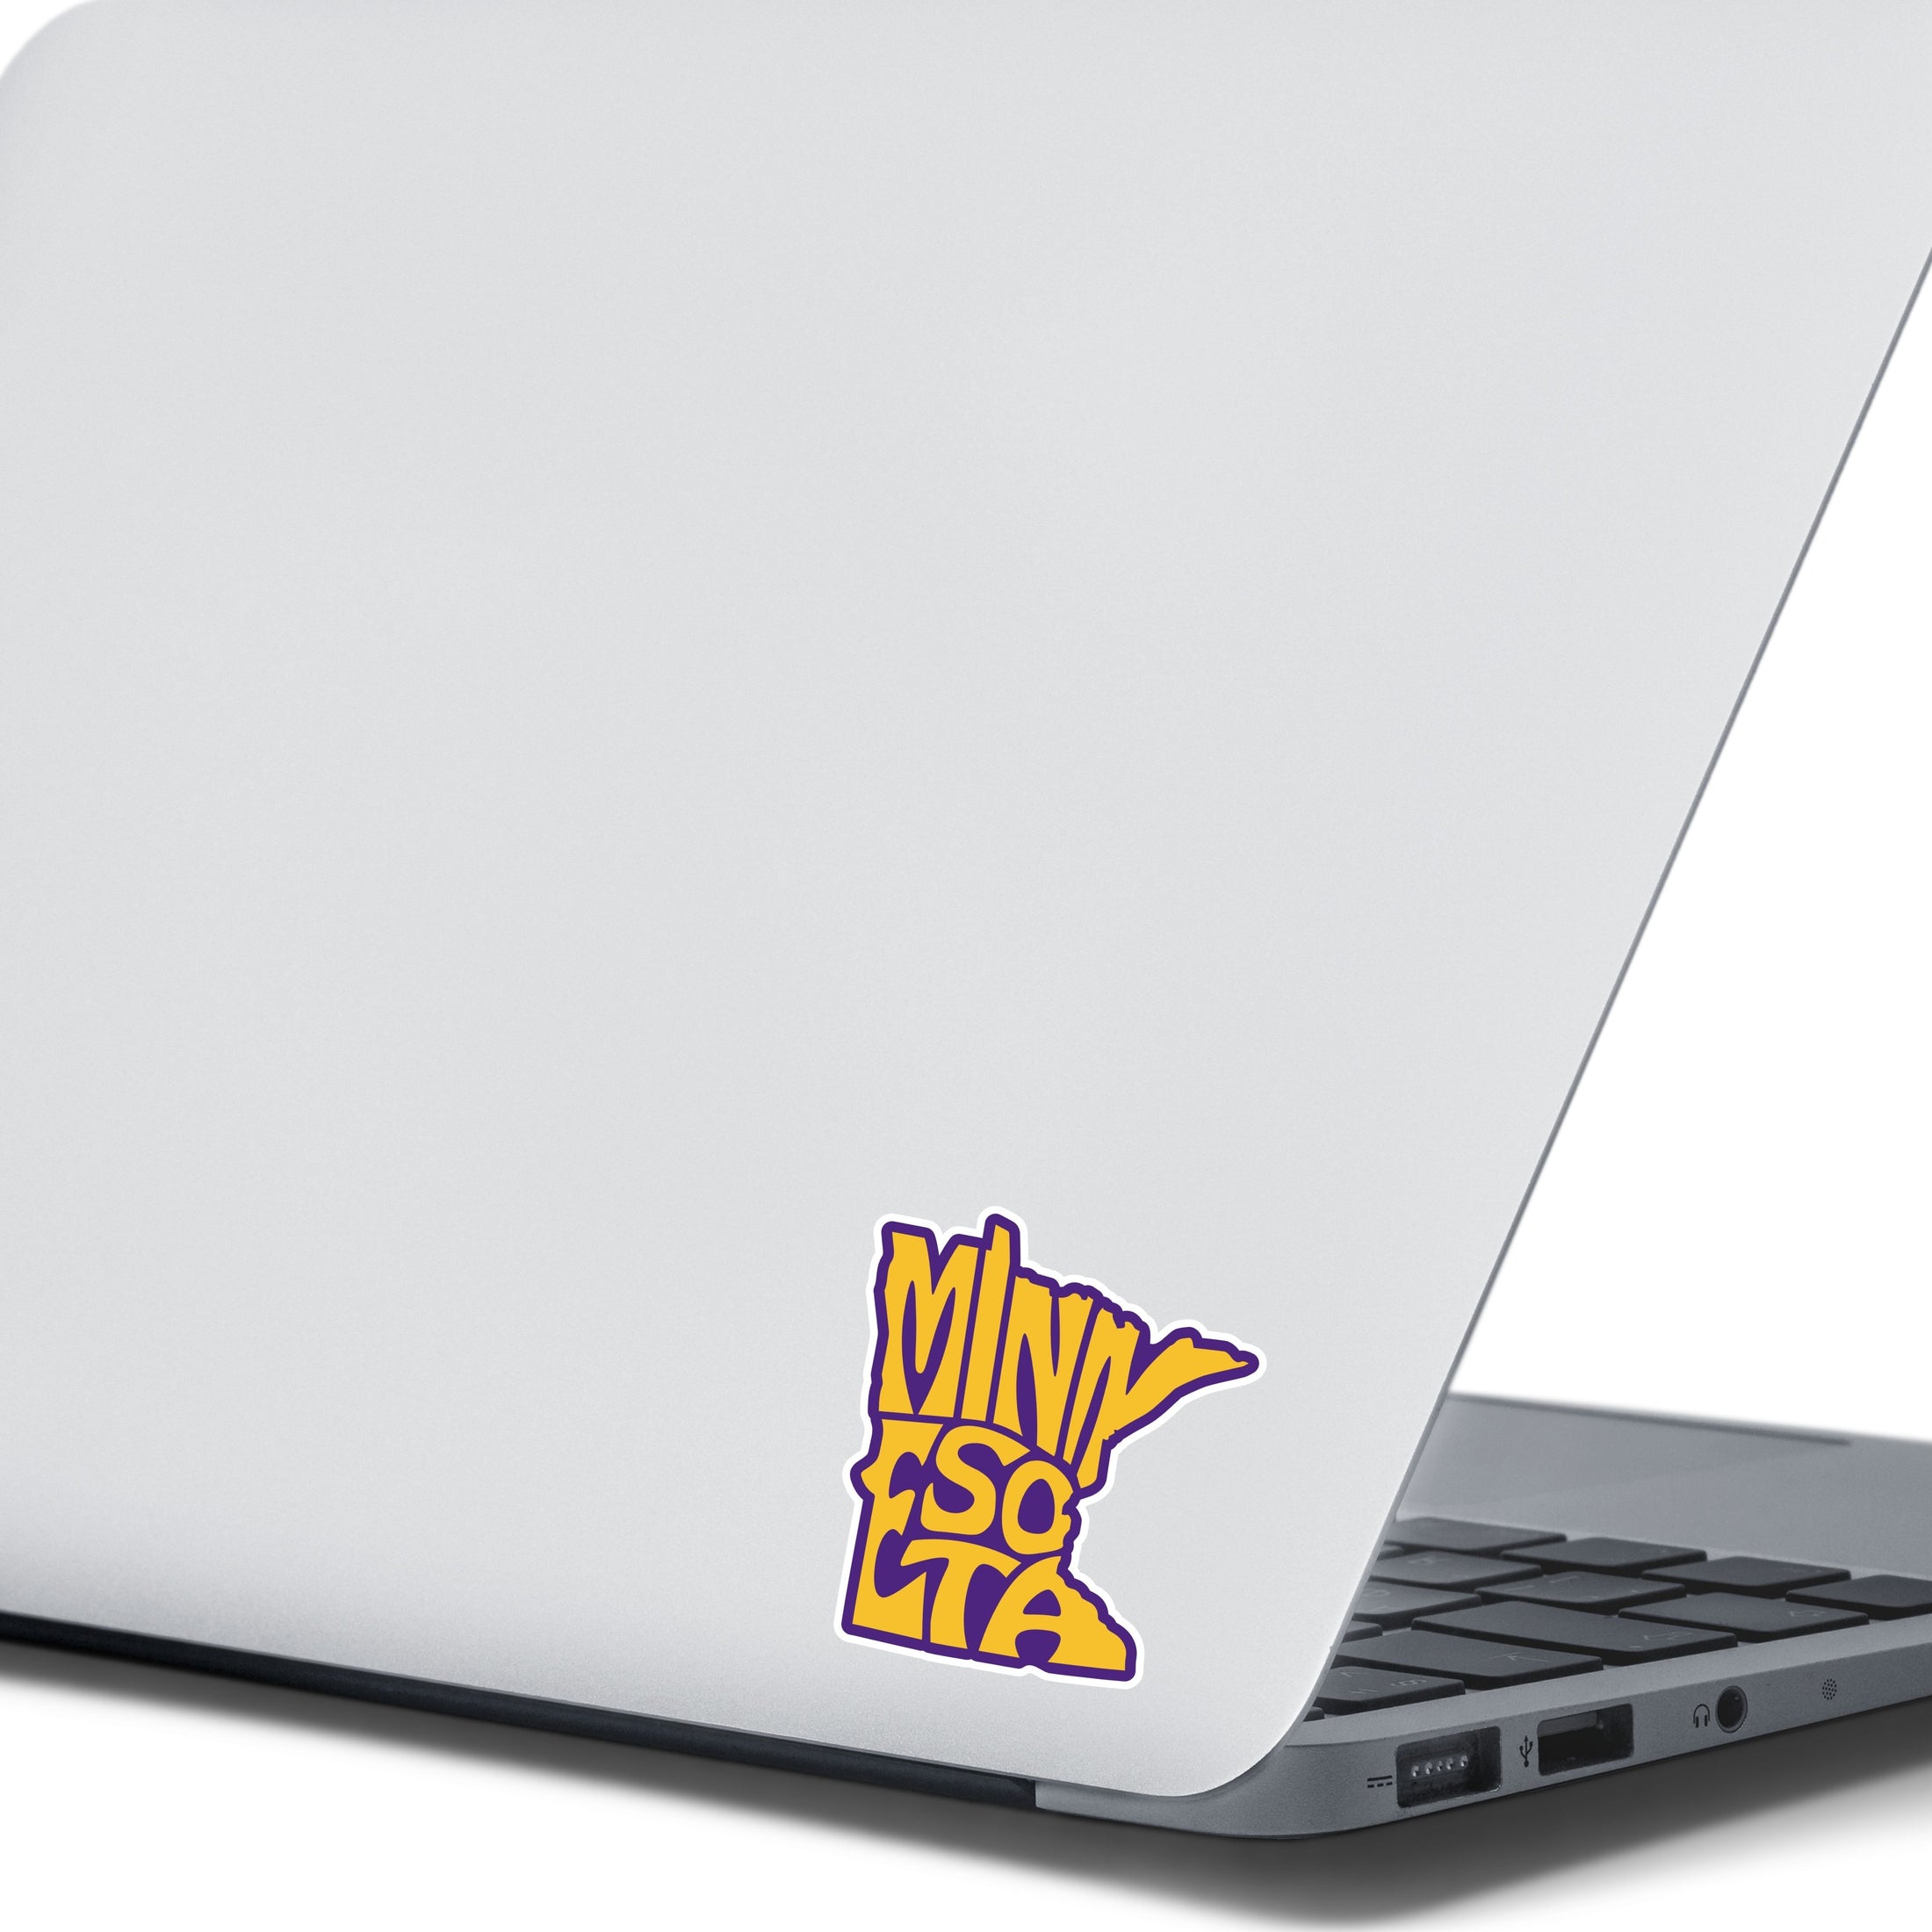 This image show the Minnesota purple and gold sticker on the back of an open laptop.